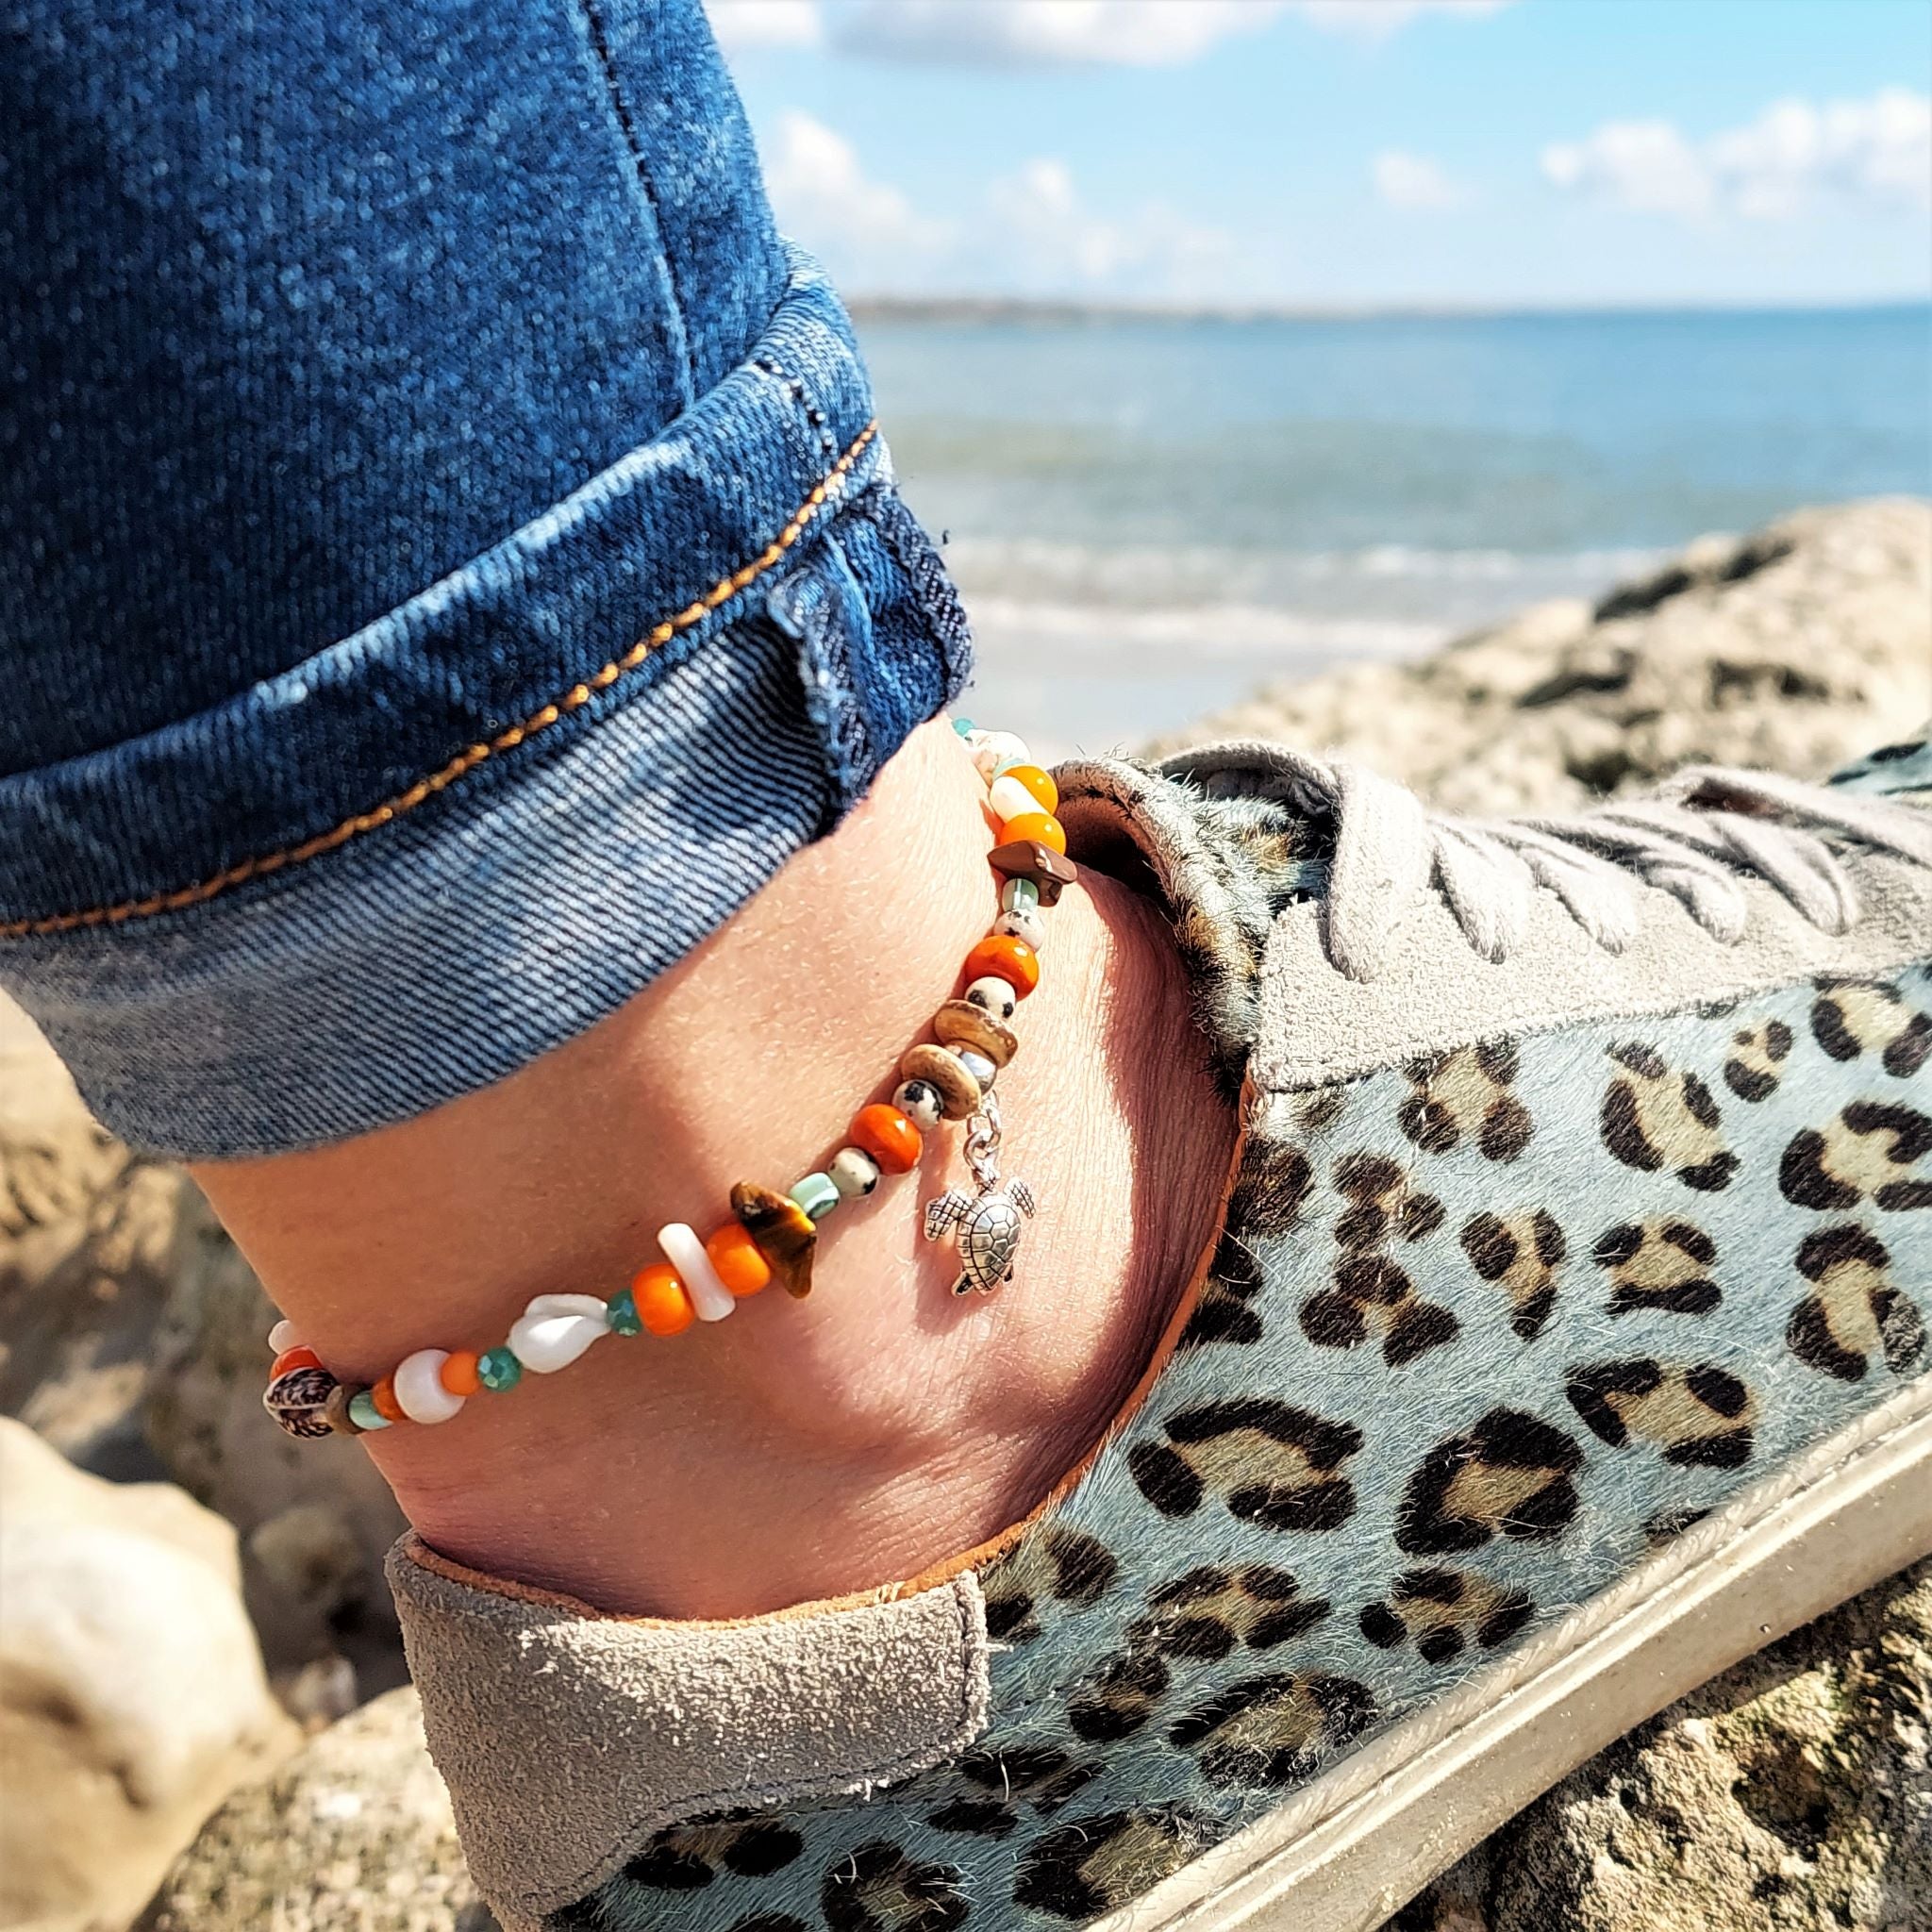 Cute handmade anklet with a combination of spiral shells, green & dalmatian jasper beads with stone chips, orange discs & silver (nickel free) Turtle & Starfish  Each anklet has sterling silver plated fastenings, lobster clasp & extension chain to adjust the length.  Length - 24cm extends to 27cm  Add a bit of boho beach chic to your ankles this Summer!